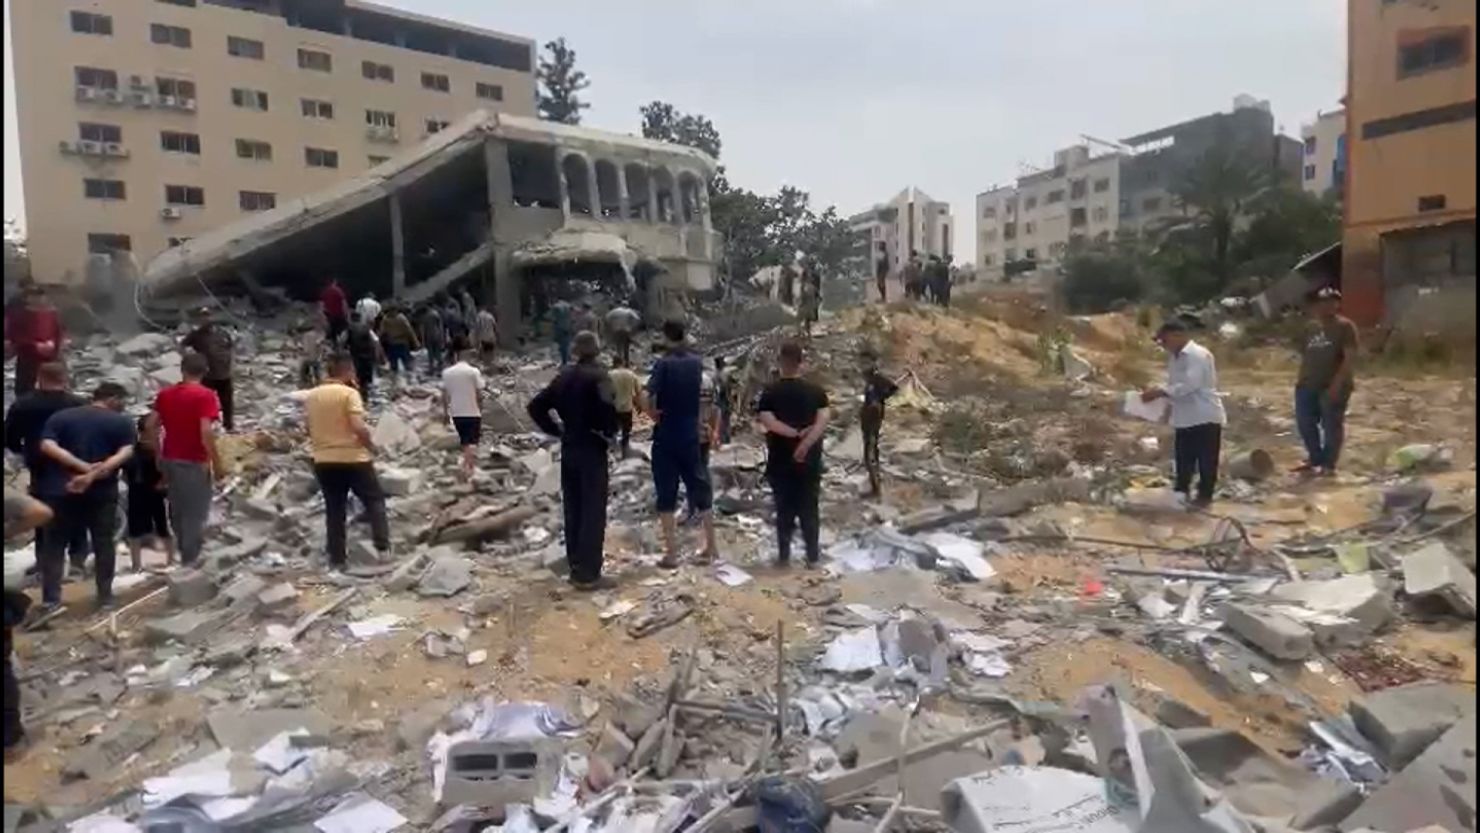 At least three people were killed in the airstrike on a house west of Gaza city on Friday, according to multiple sources.